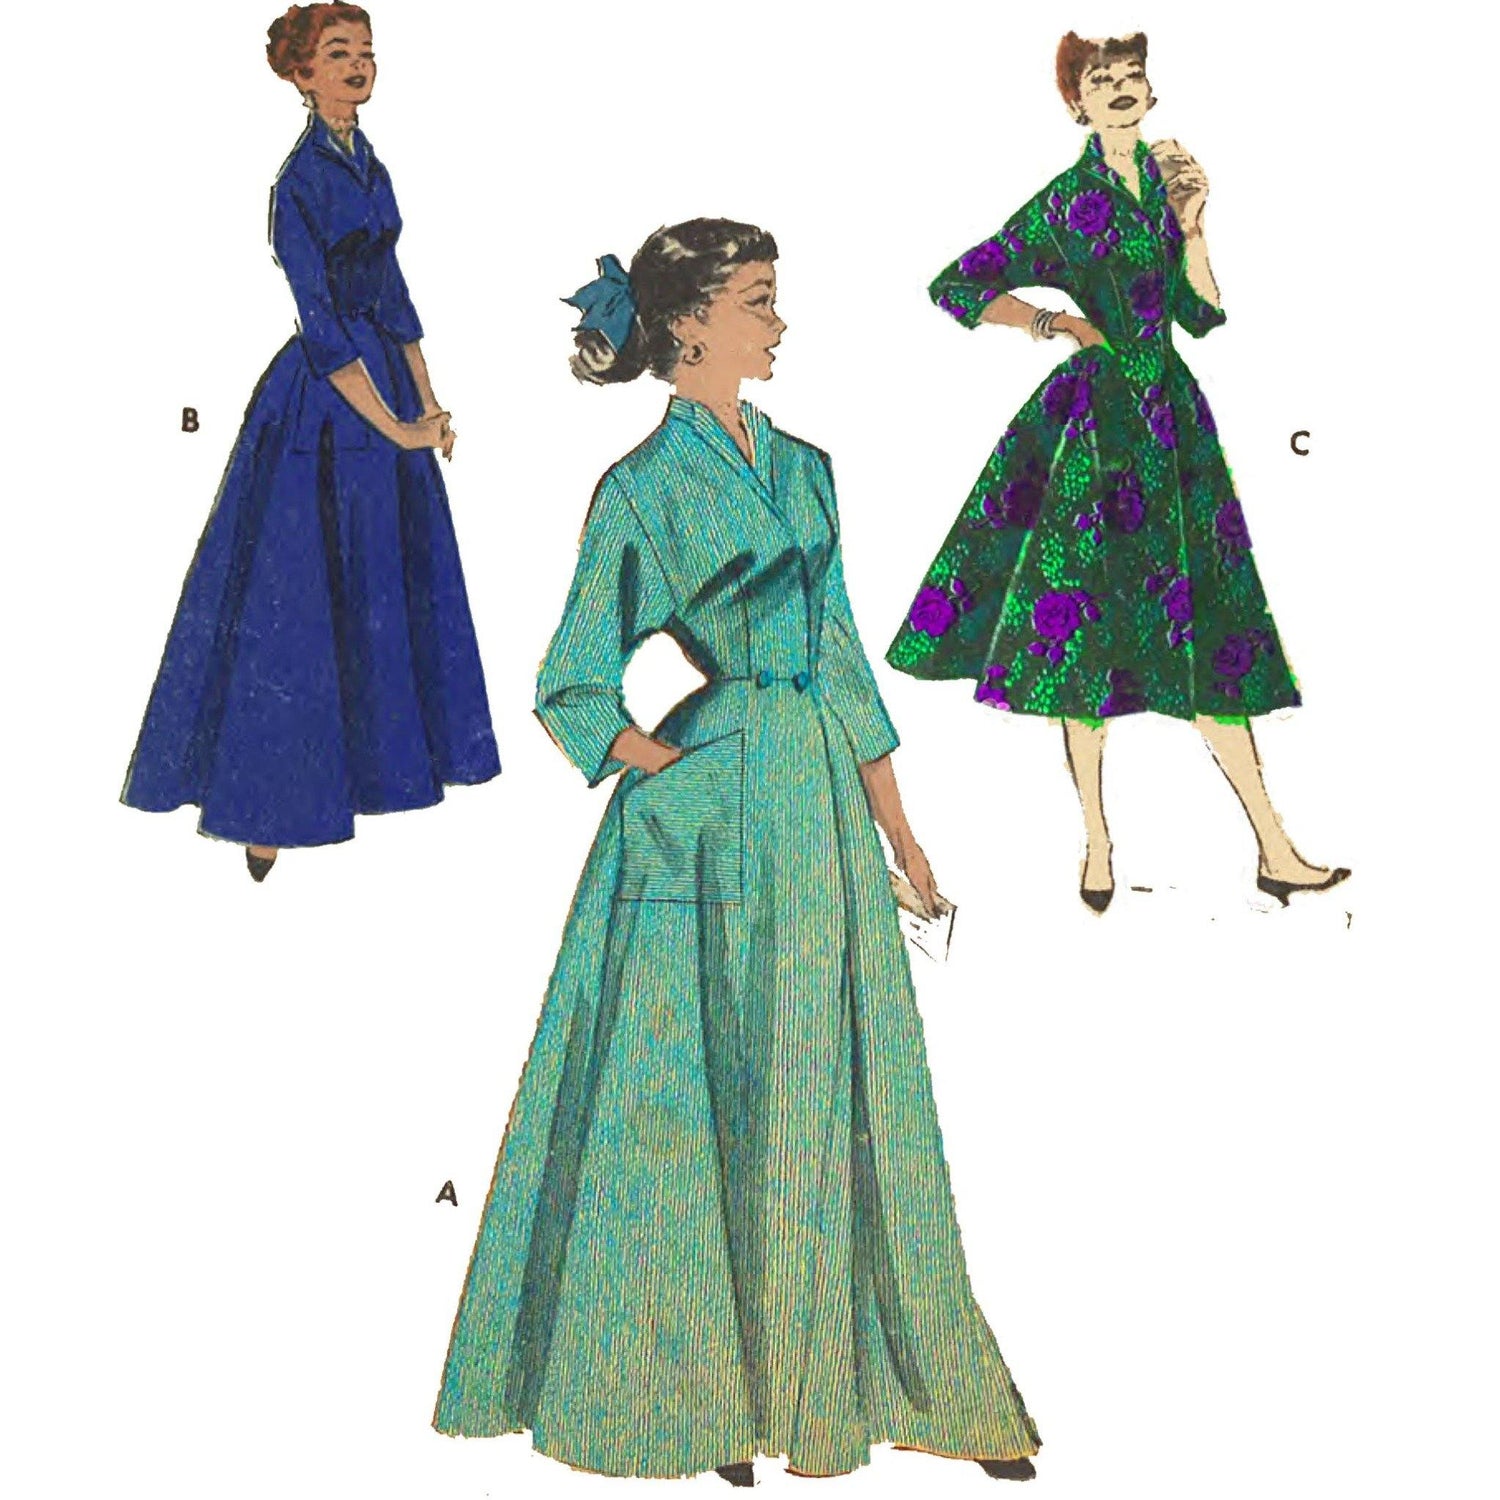 83,500 Vintage Sewing Patterns have been released for all to sew and enjoy!